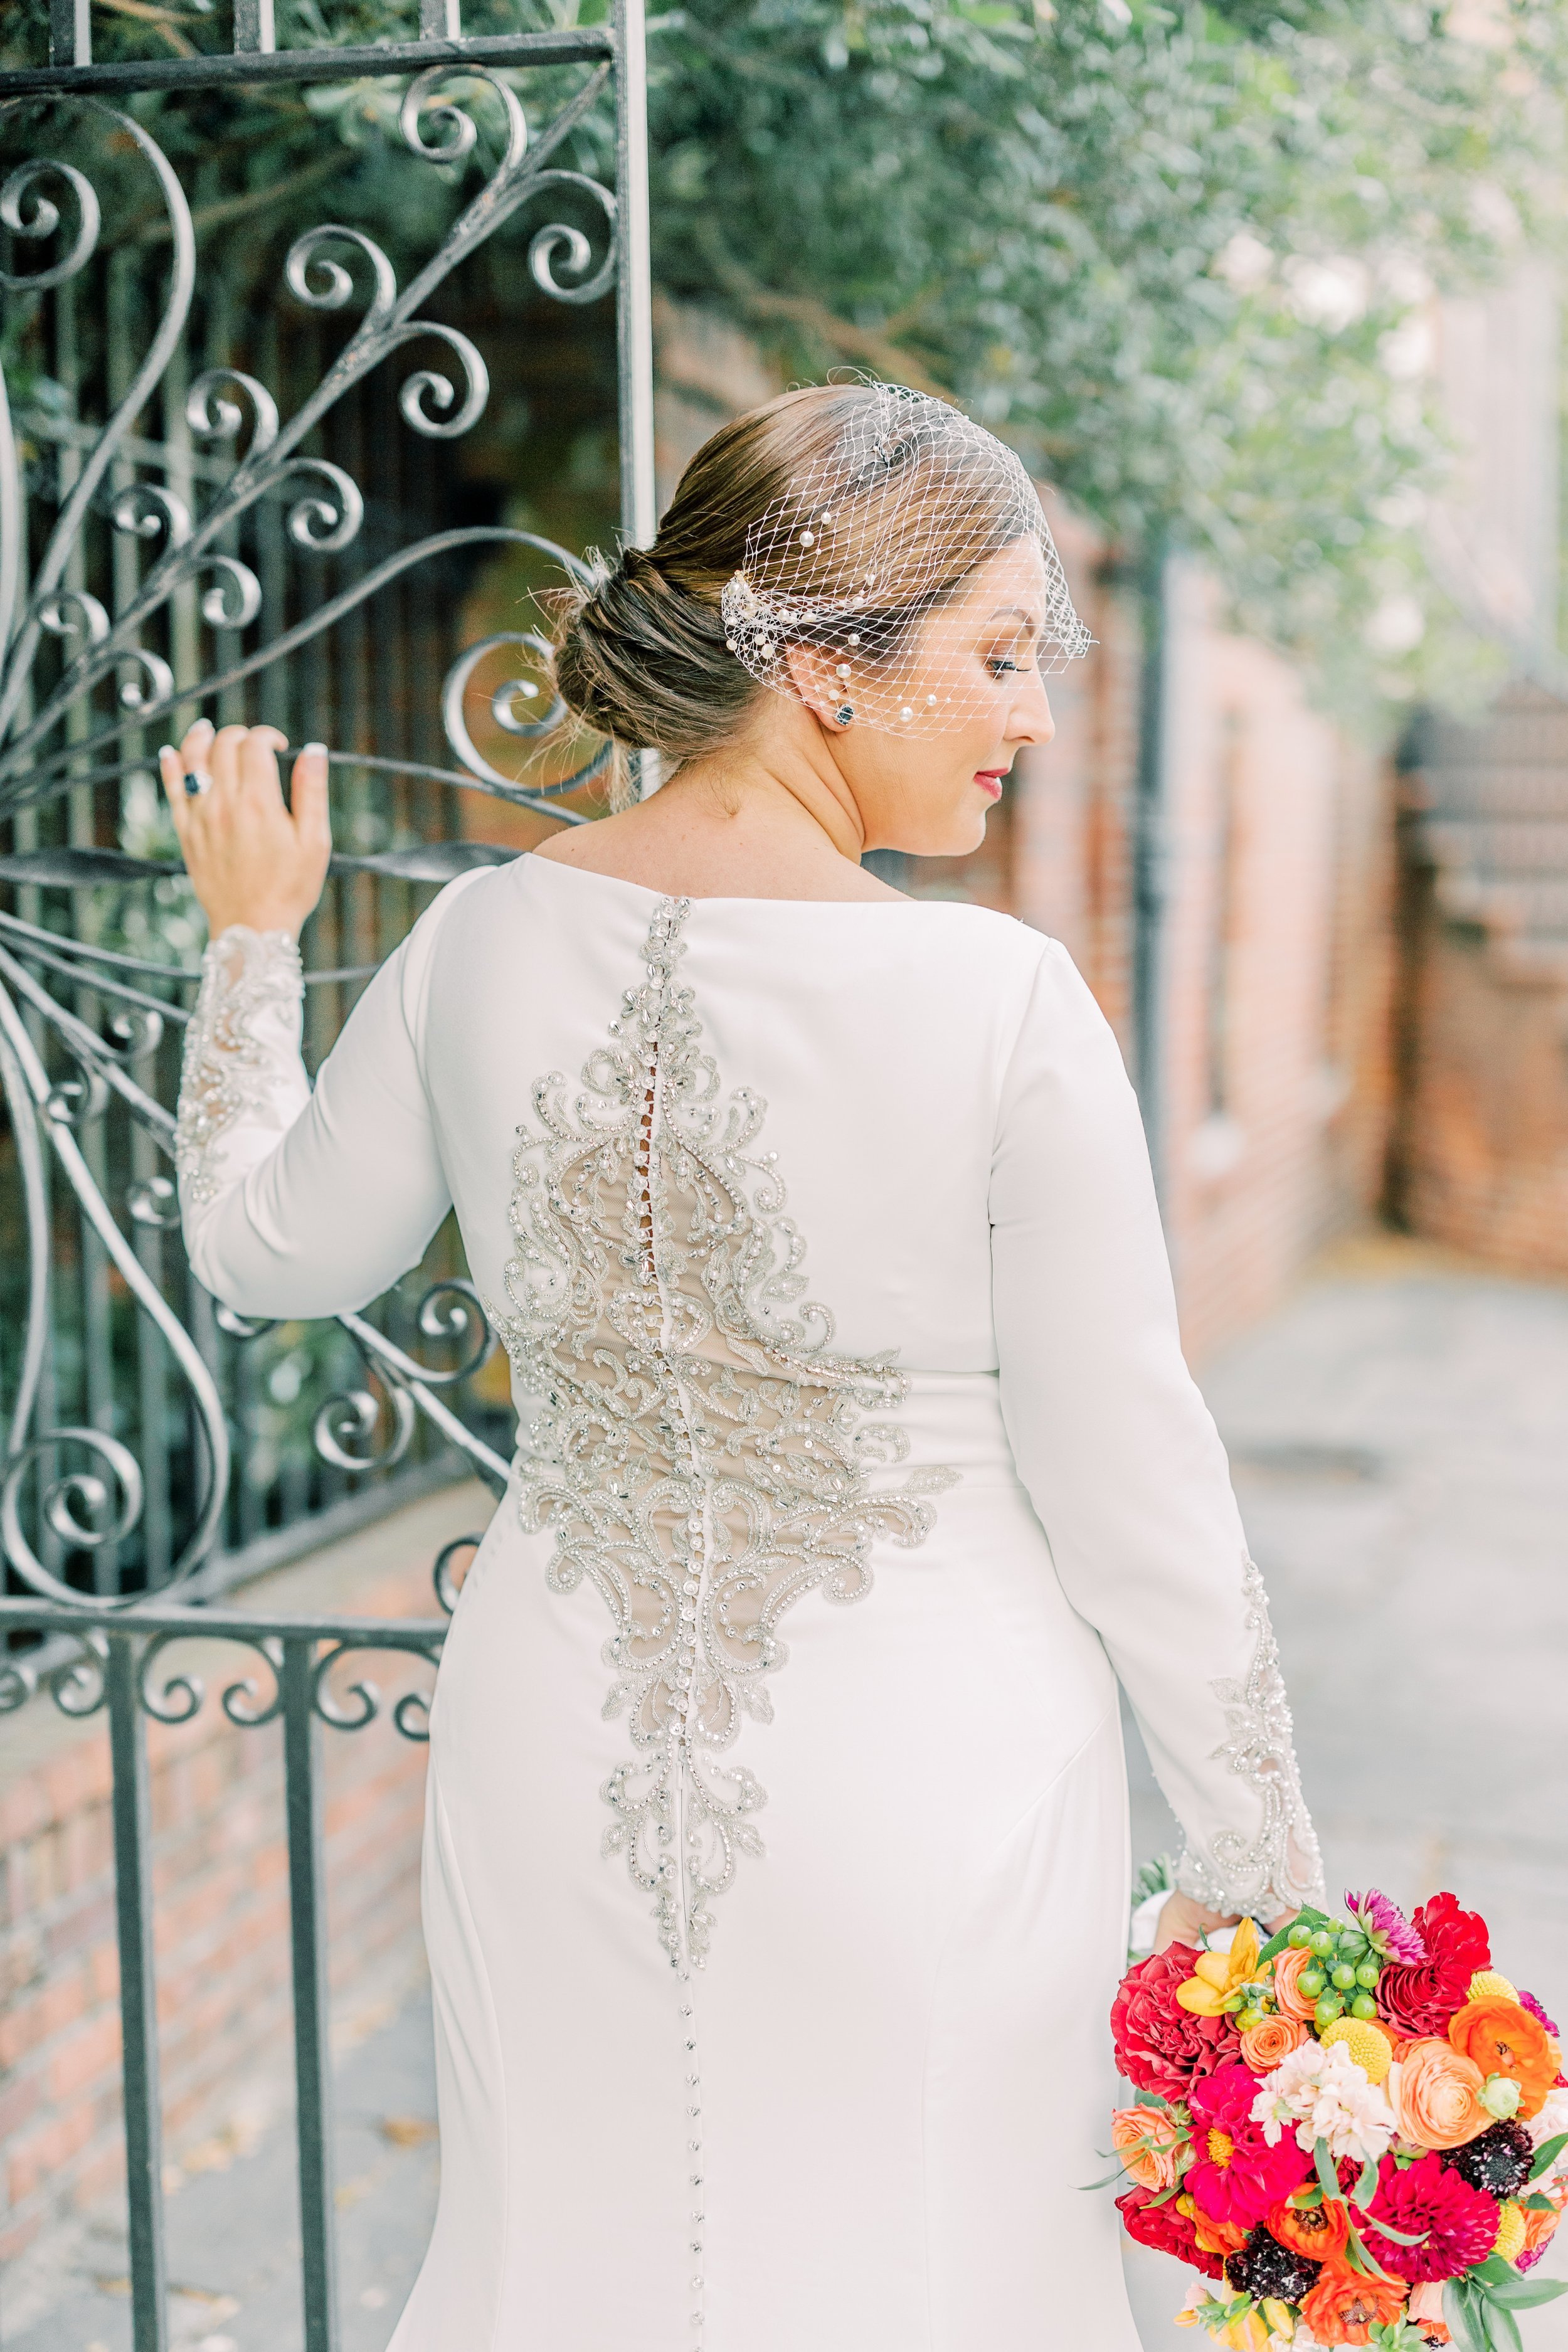 ivory-and-beau-blog-wedding-blog-real-bride-aston-by-sottero-and-midgley-maggie-sottero-wedding-dress-savannah-wedding-savannah-bride-savannah-bridal-shop-davenport-house-wedding-Rachel Linder Photography_Savannah Wedding Photographer-243.jpg